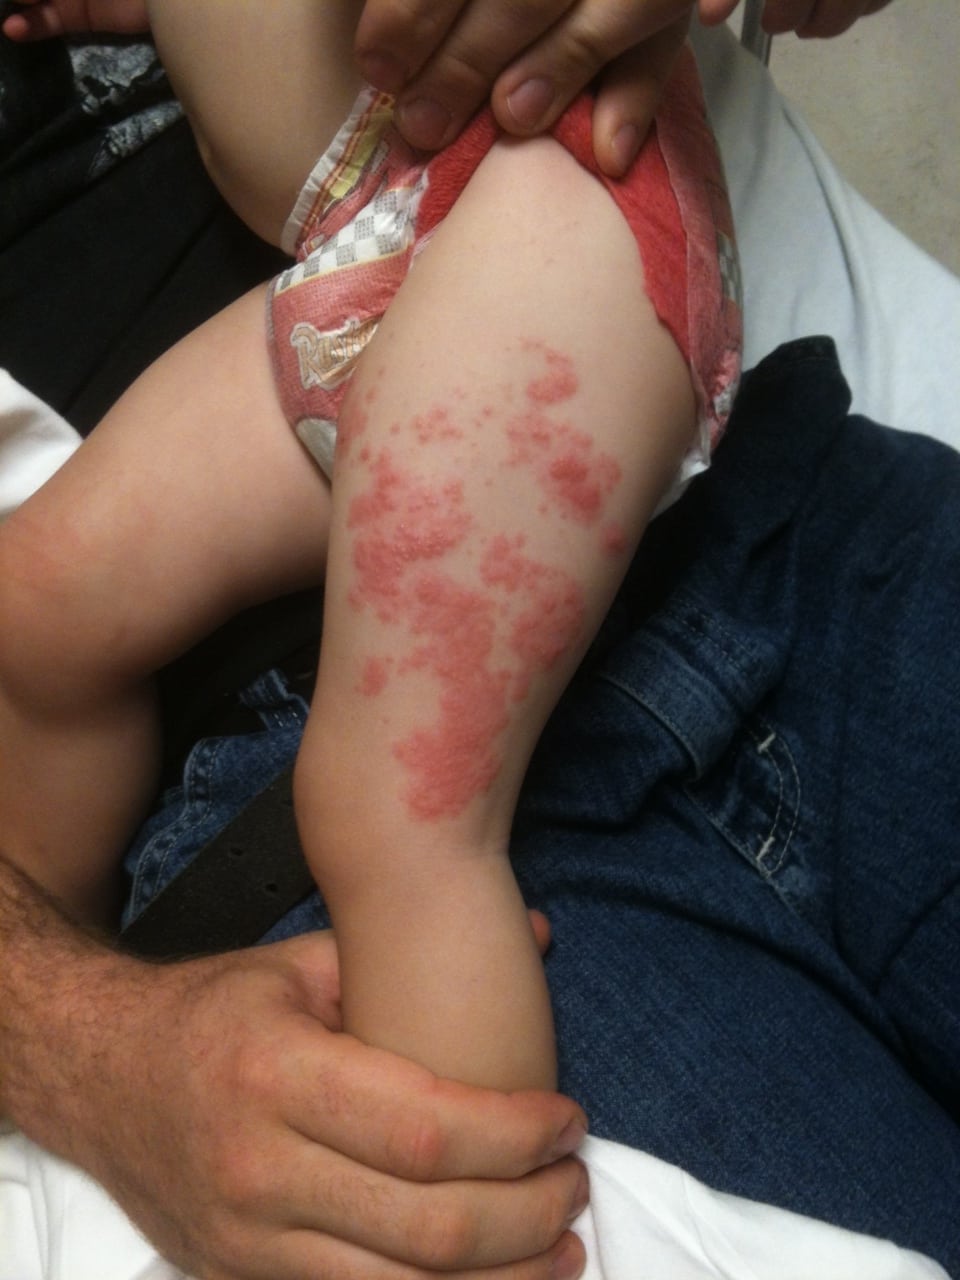 Figure 2 Classic dermatomal distribution of vesicular rash extending from the left lumbar back to the left anterolateral thigh.